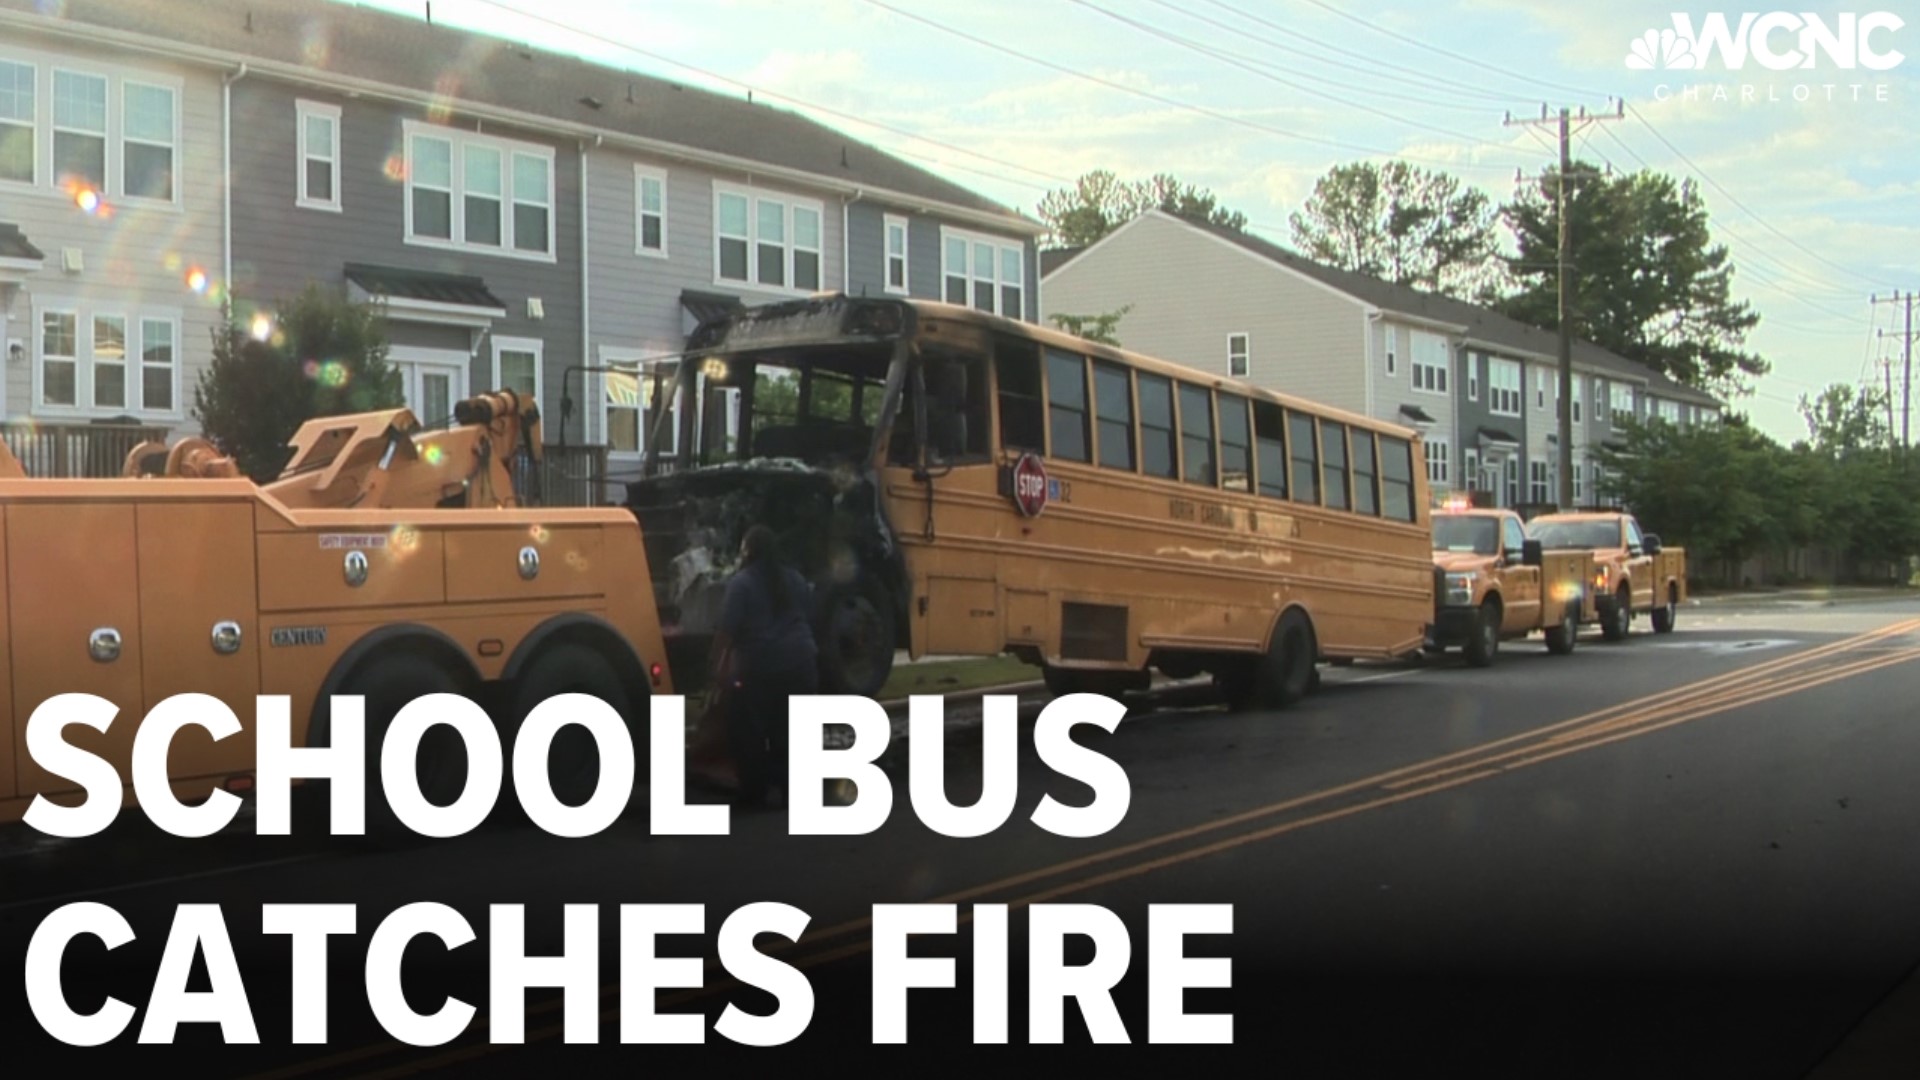 All students were safely evacuated after a Charlotte-Mecklenburg Schools bus driver noticed smoke on the bus, the district confirmed to WCNC Charlotte.